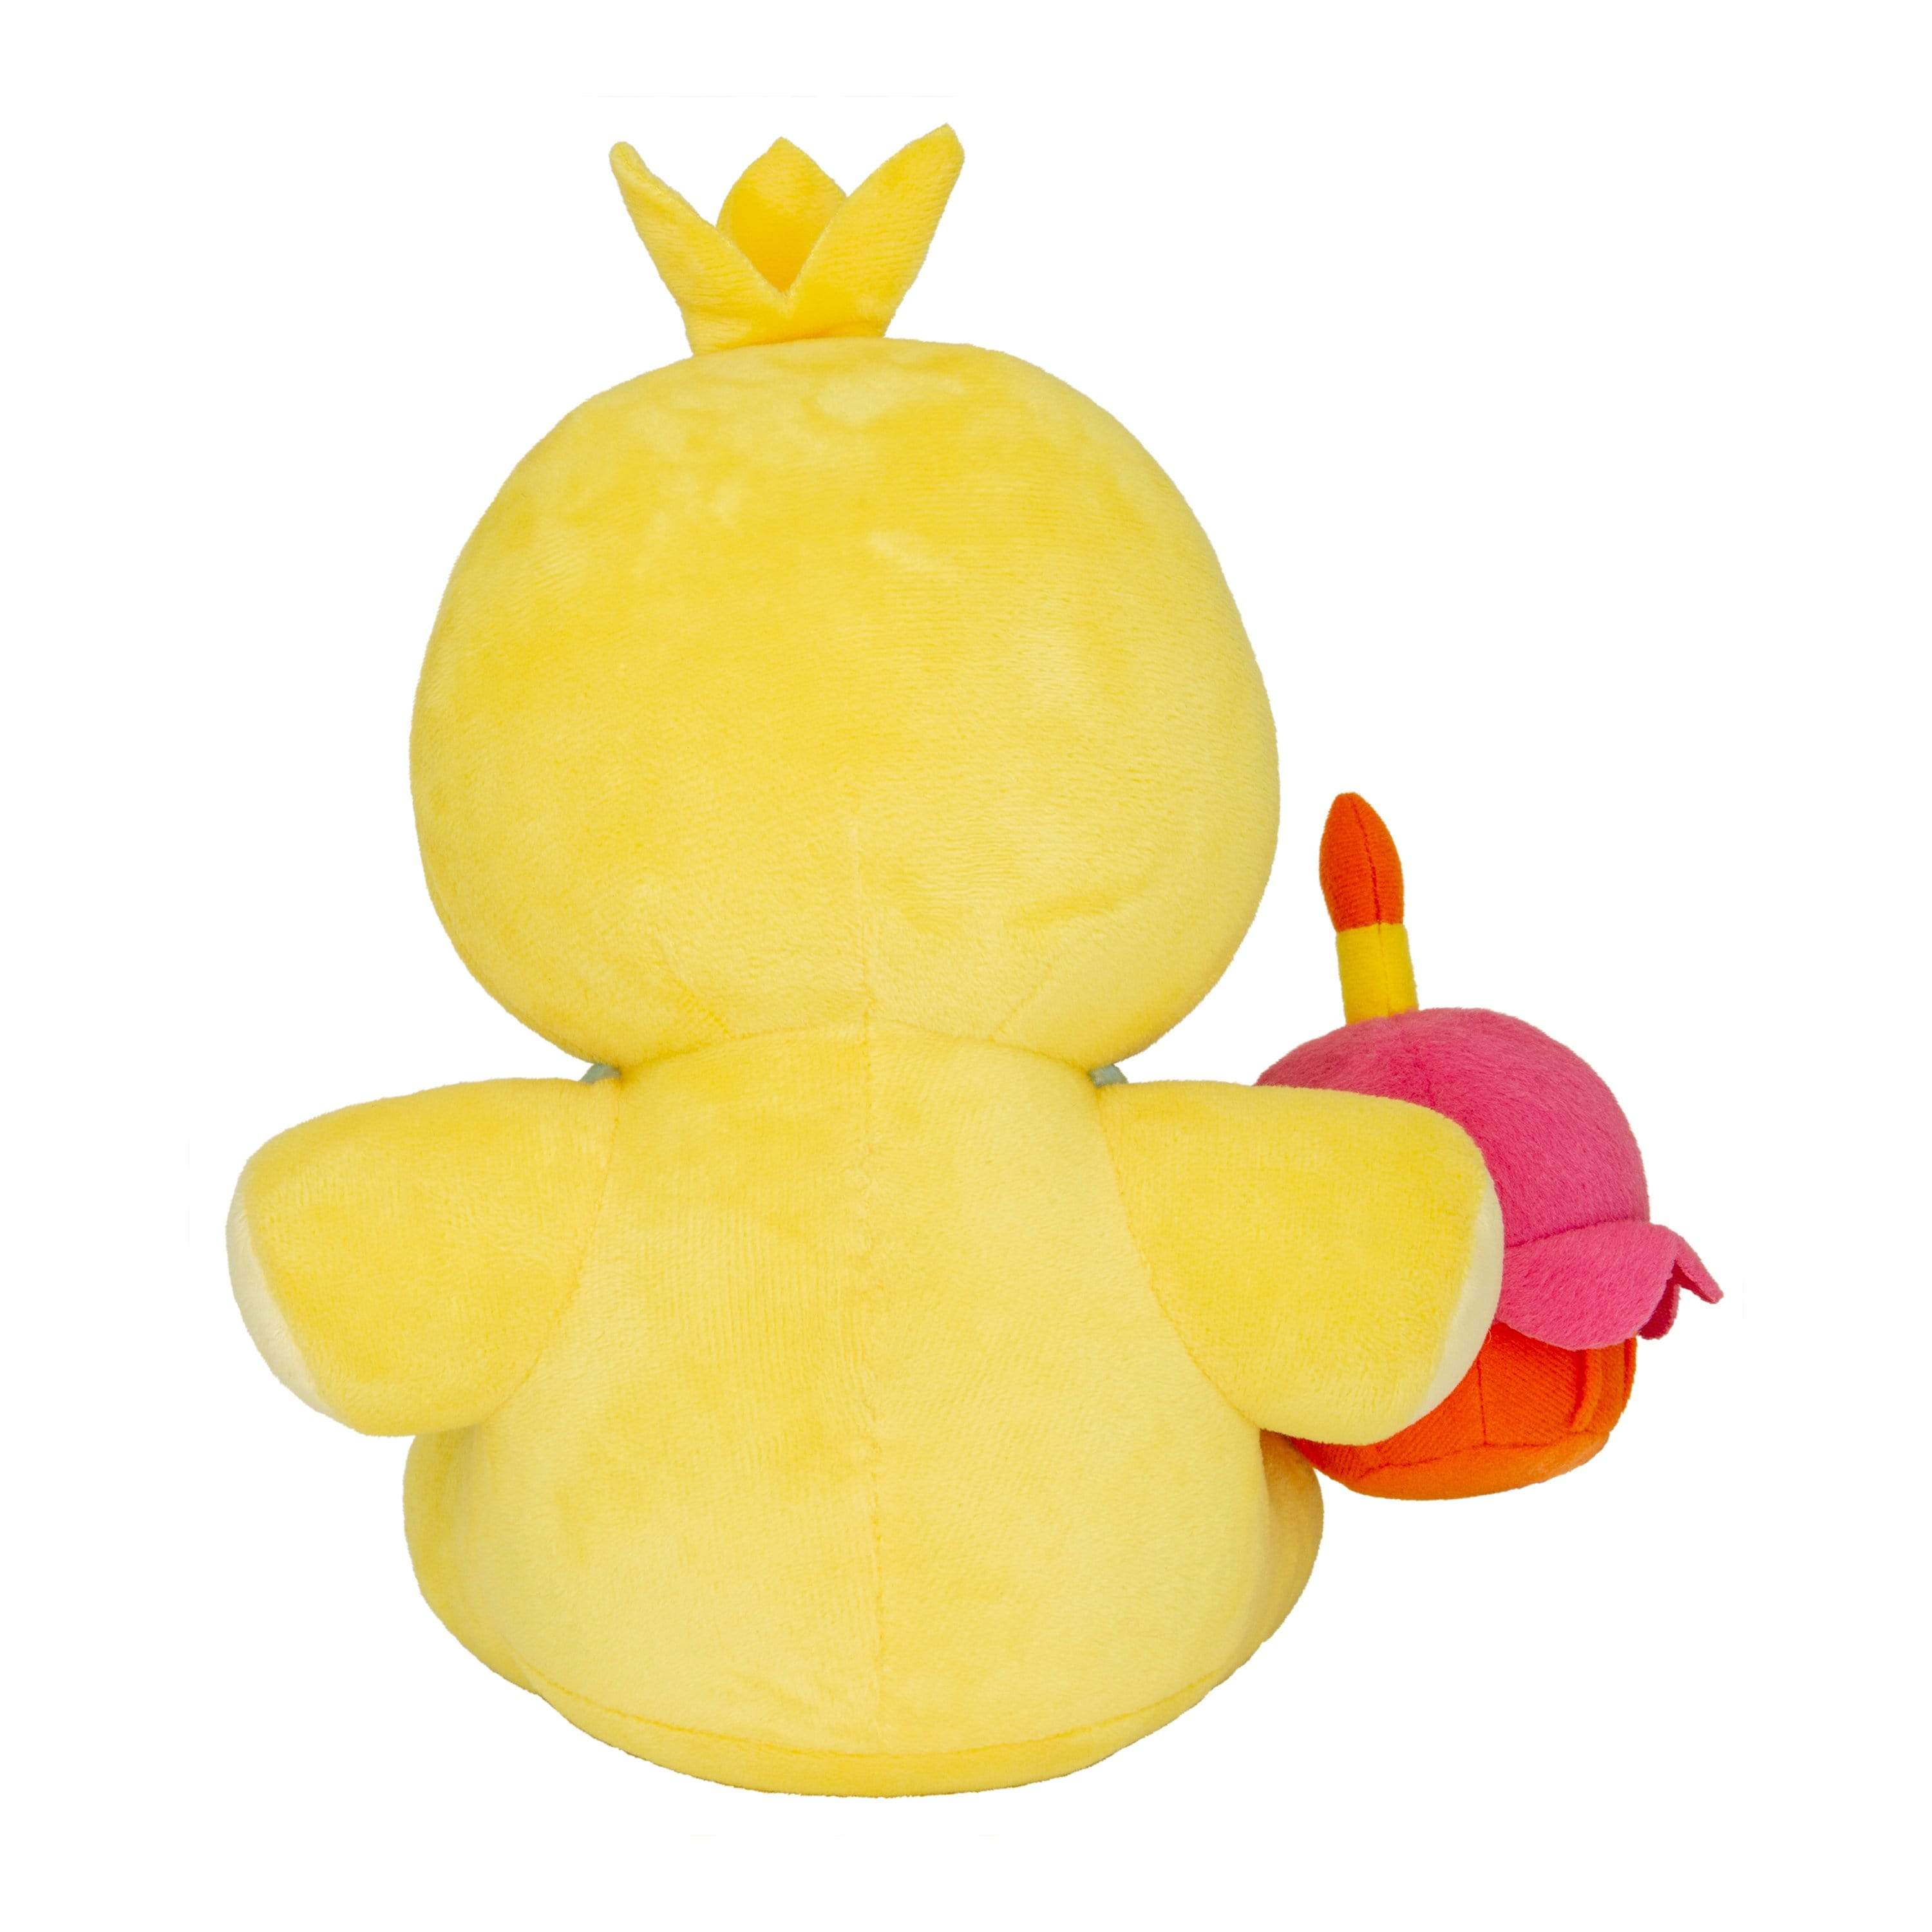 Five Nights At Freddy's 12 Plush: Chica